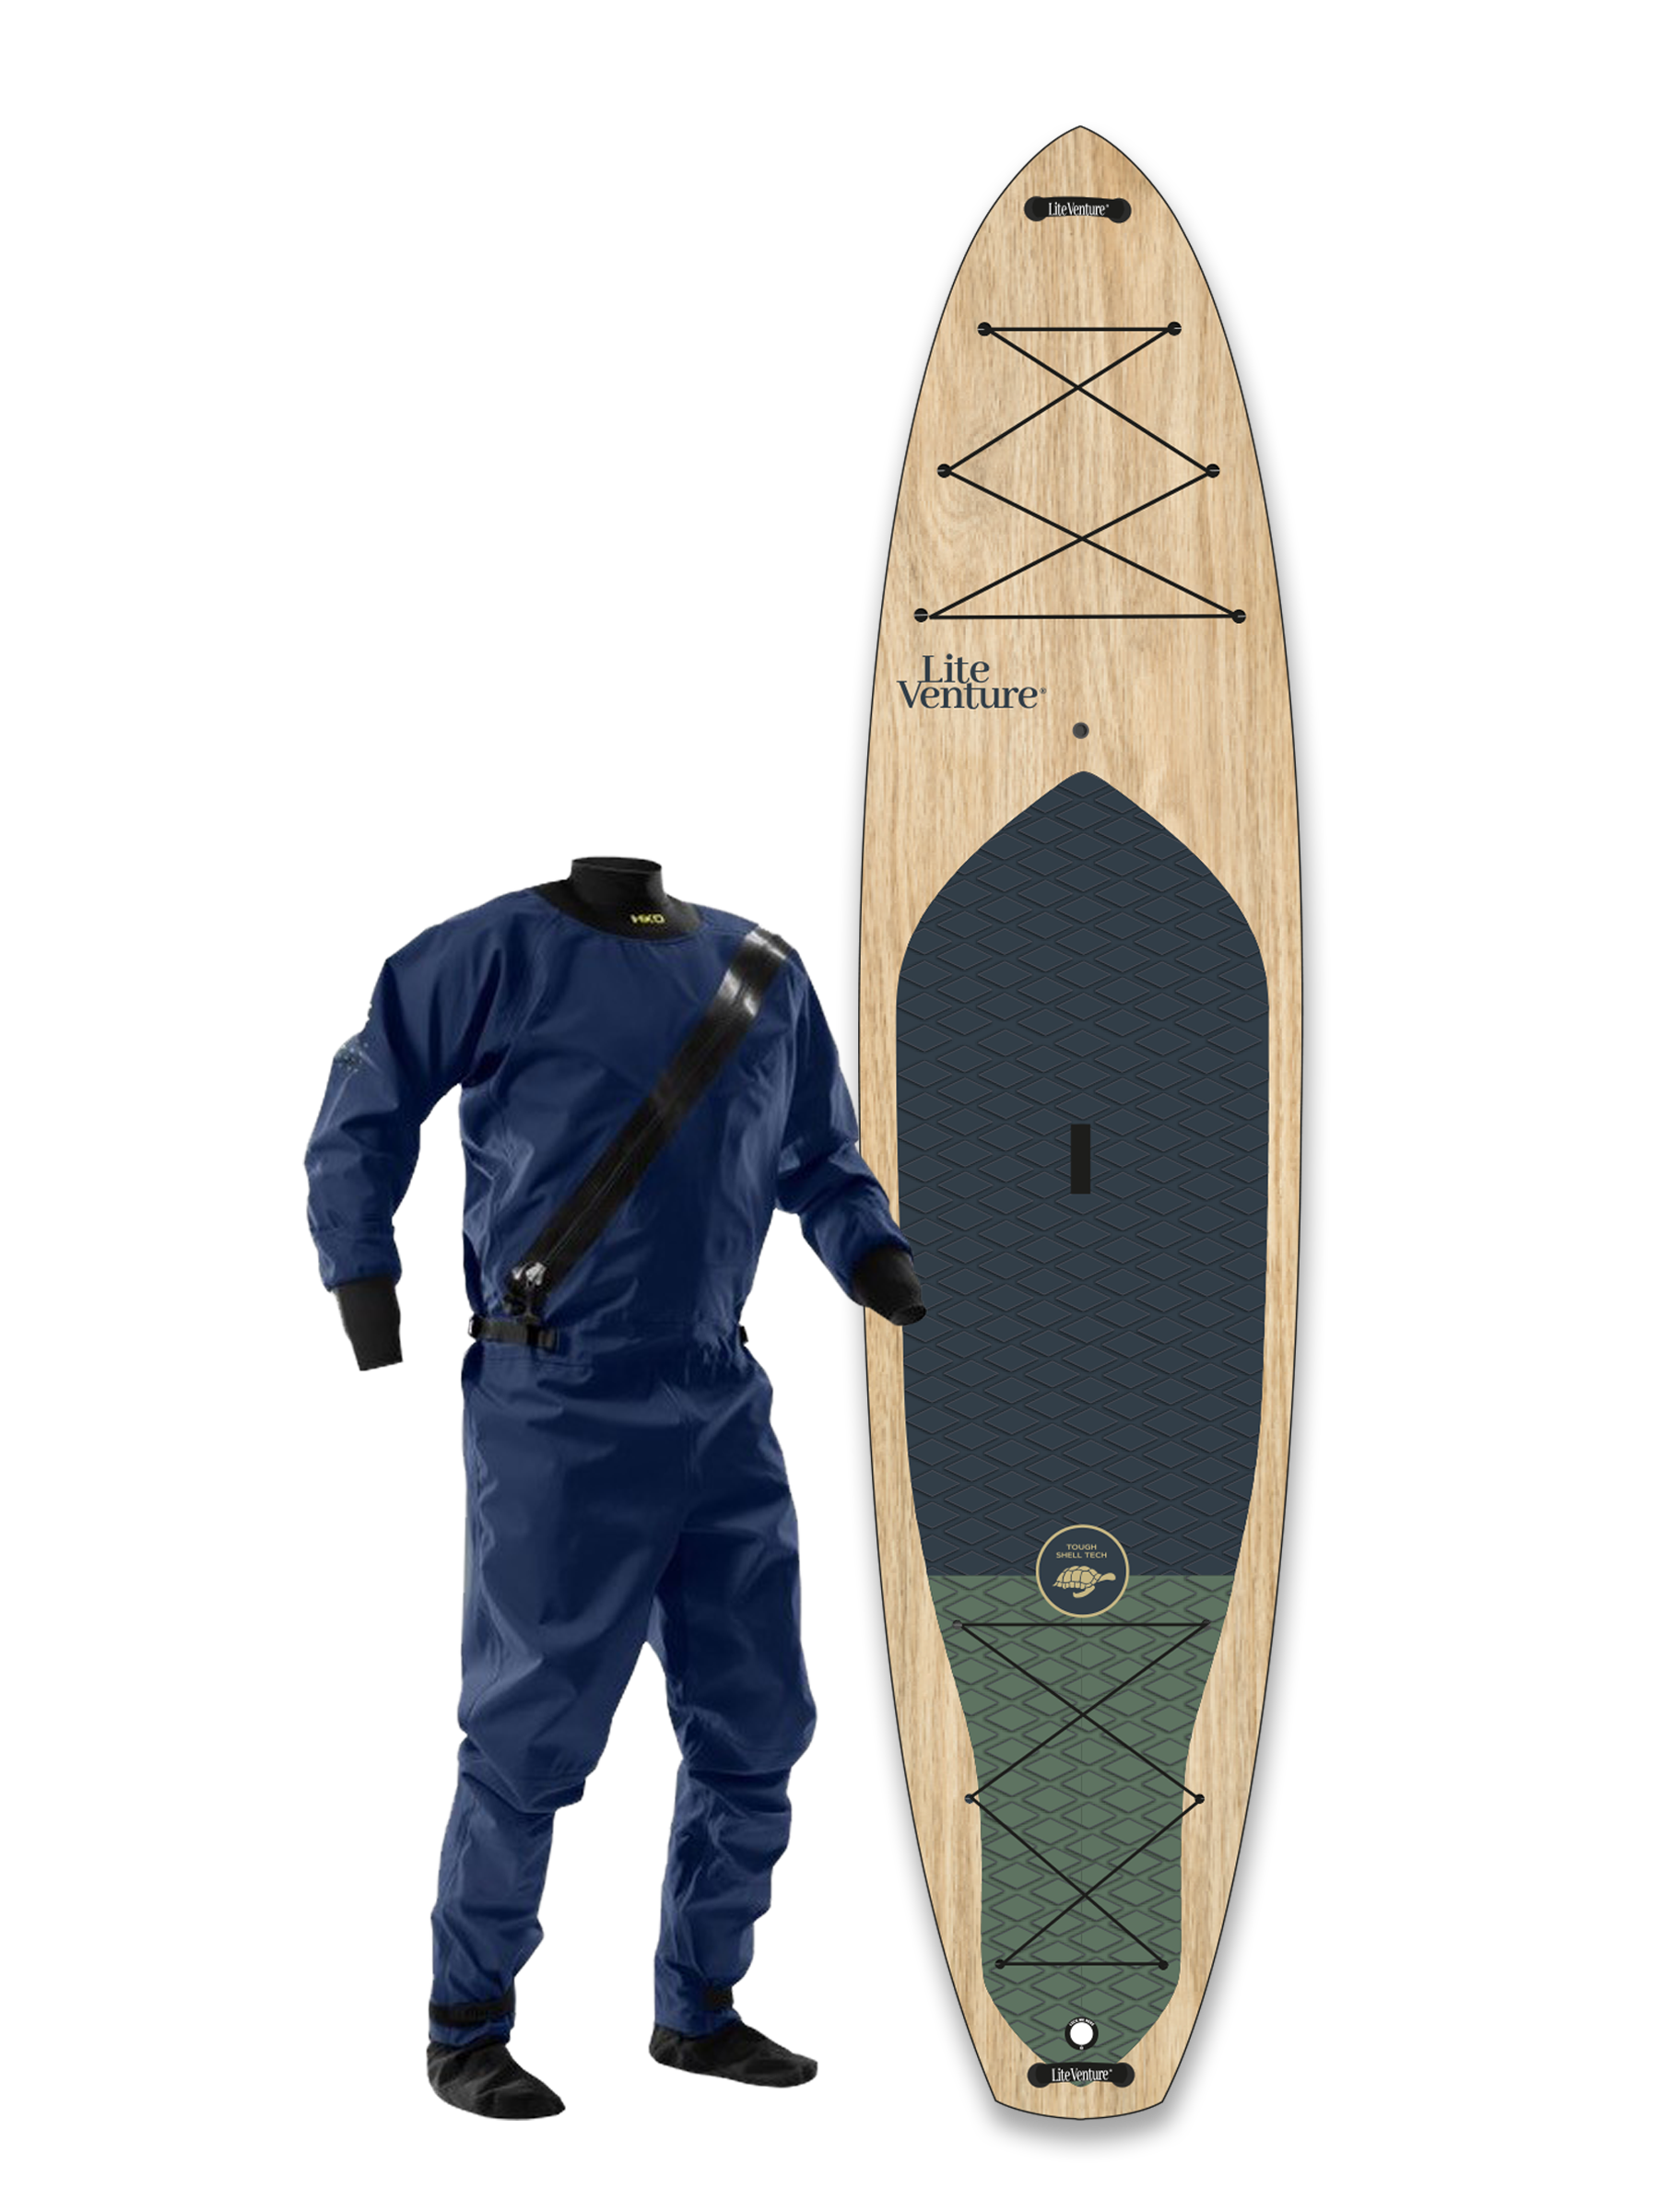 Tough Shell Touring-12'0" x 32"-wood winter deal includes drysuit